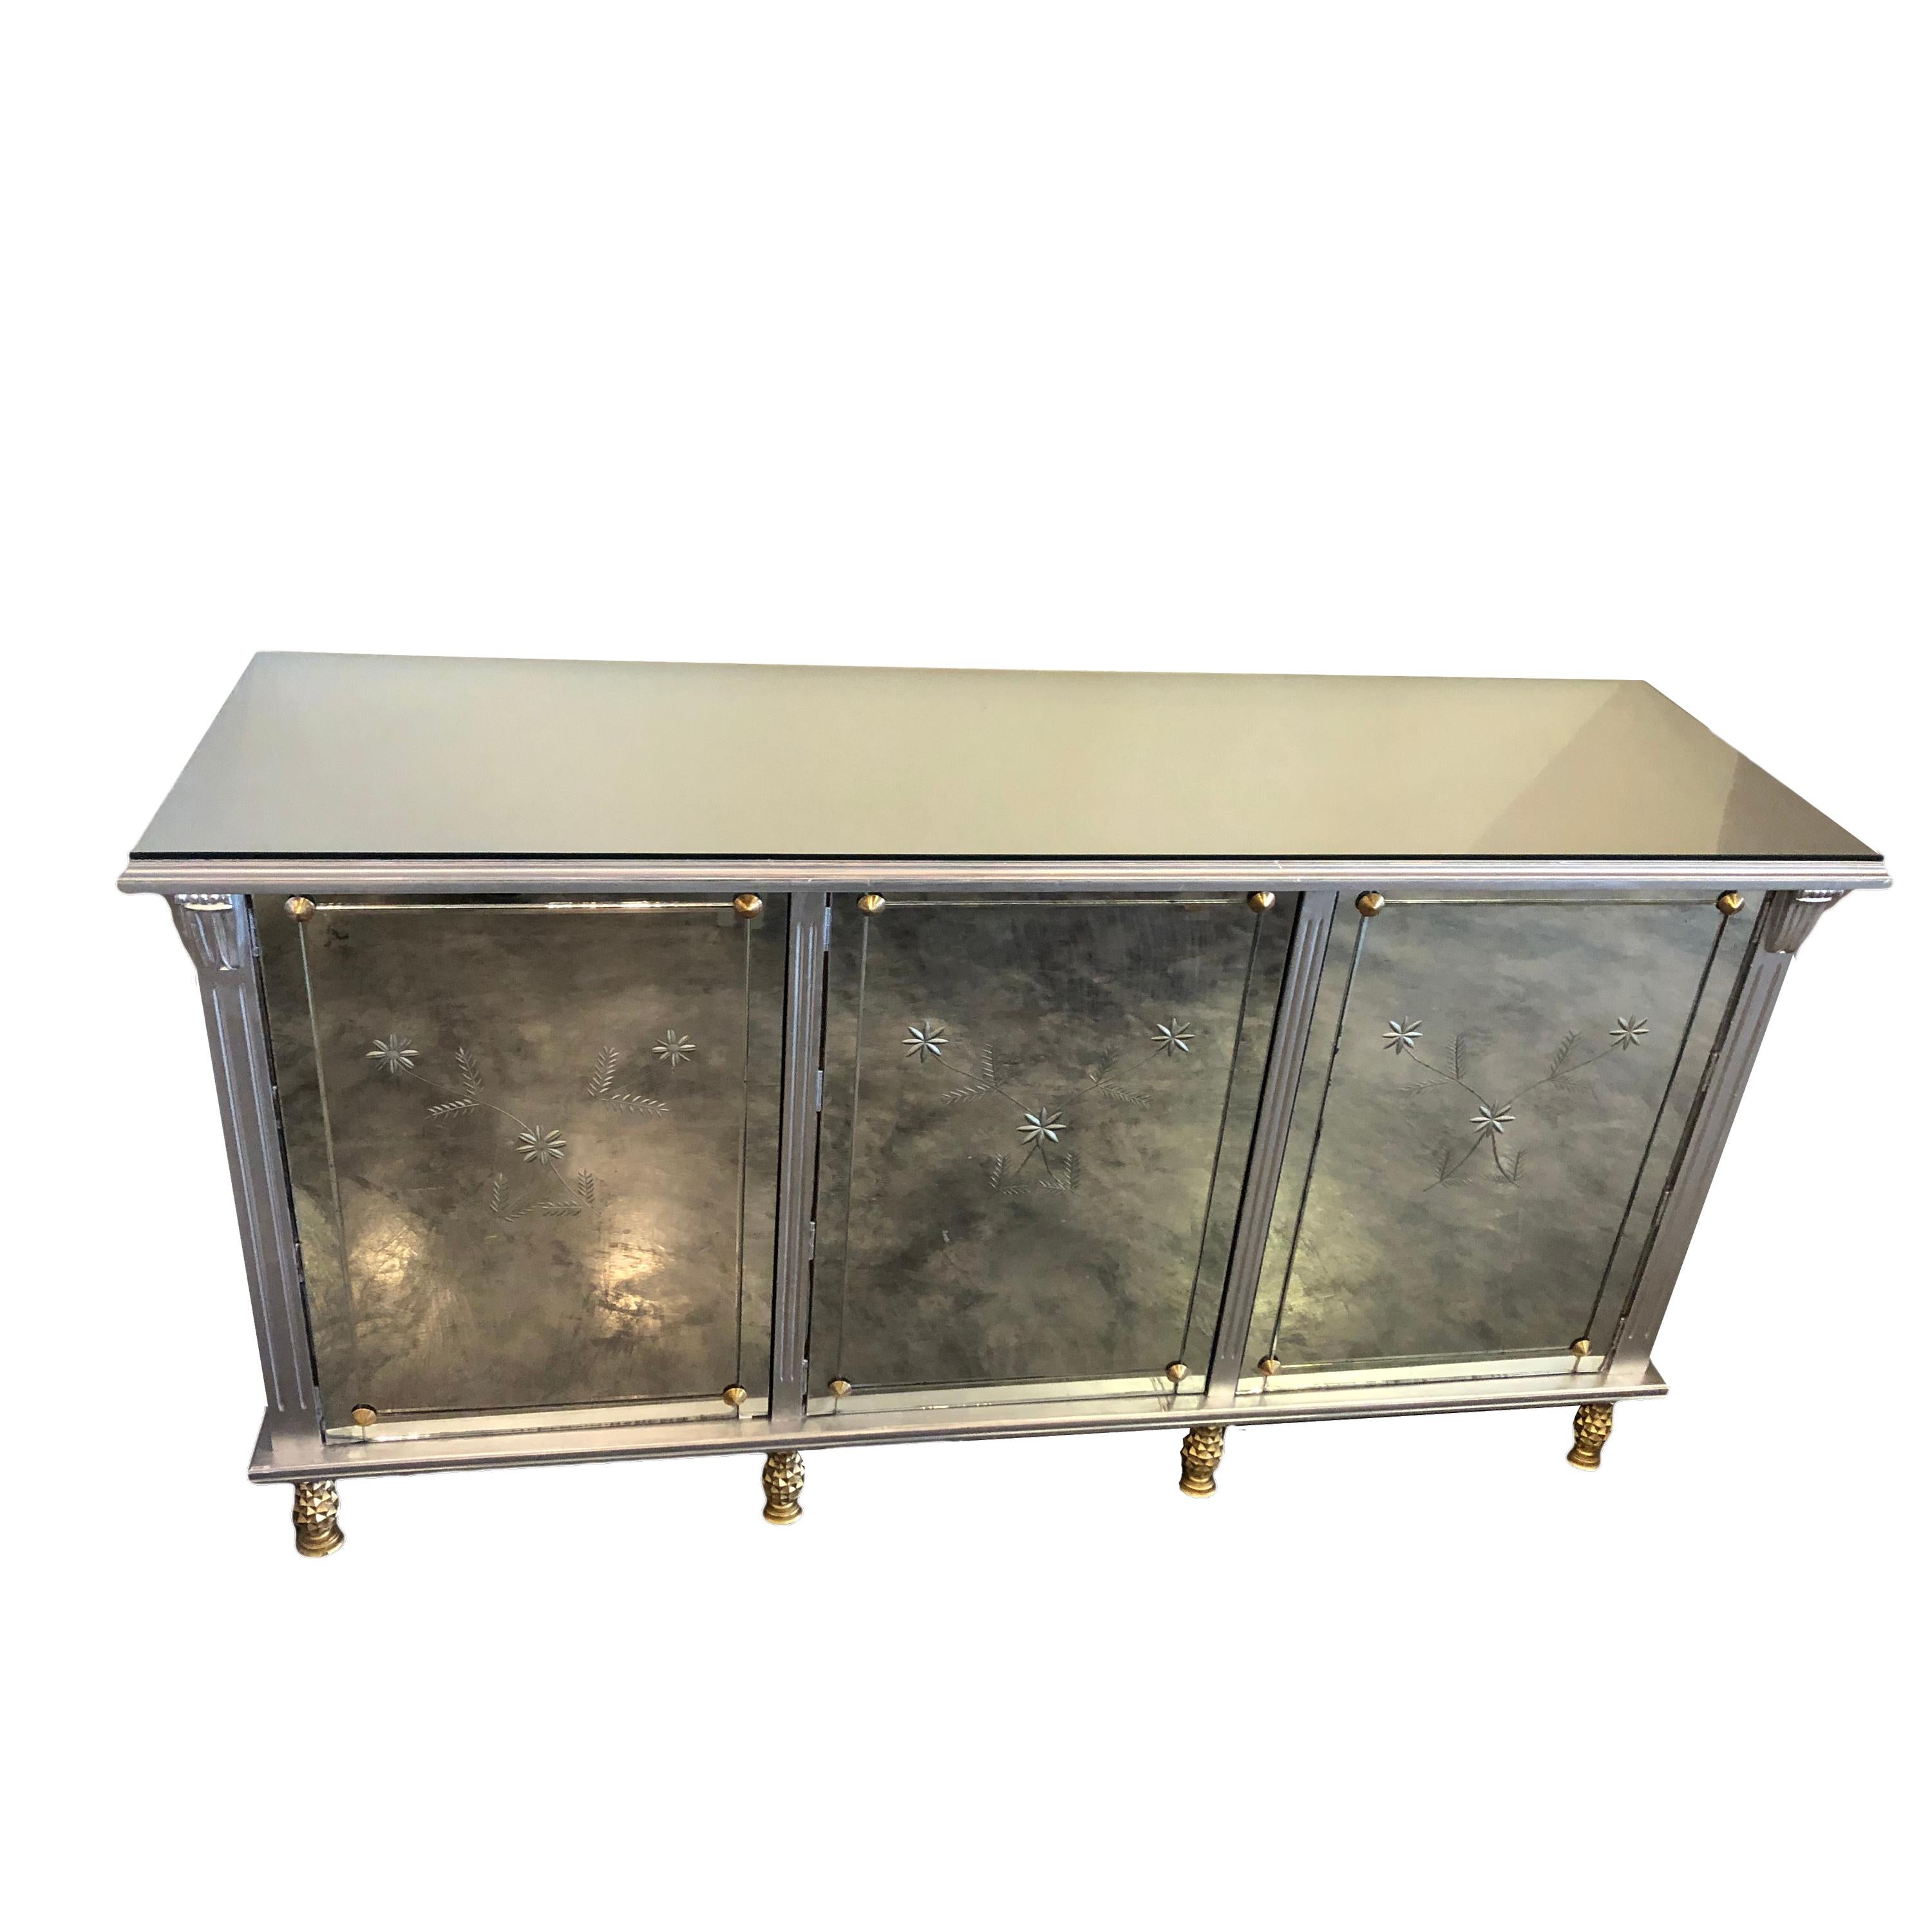 A rare Mexican Mid-Century Modern silver wood credenza by Mexican designer Arturo Pani. The credenza shows a mirror top and 3 doors with mirrors, which show cut floral designs. The central door has 3 drawers. Legs are in the shape of golden pine